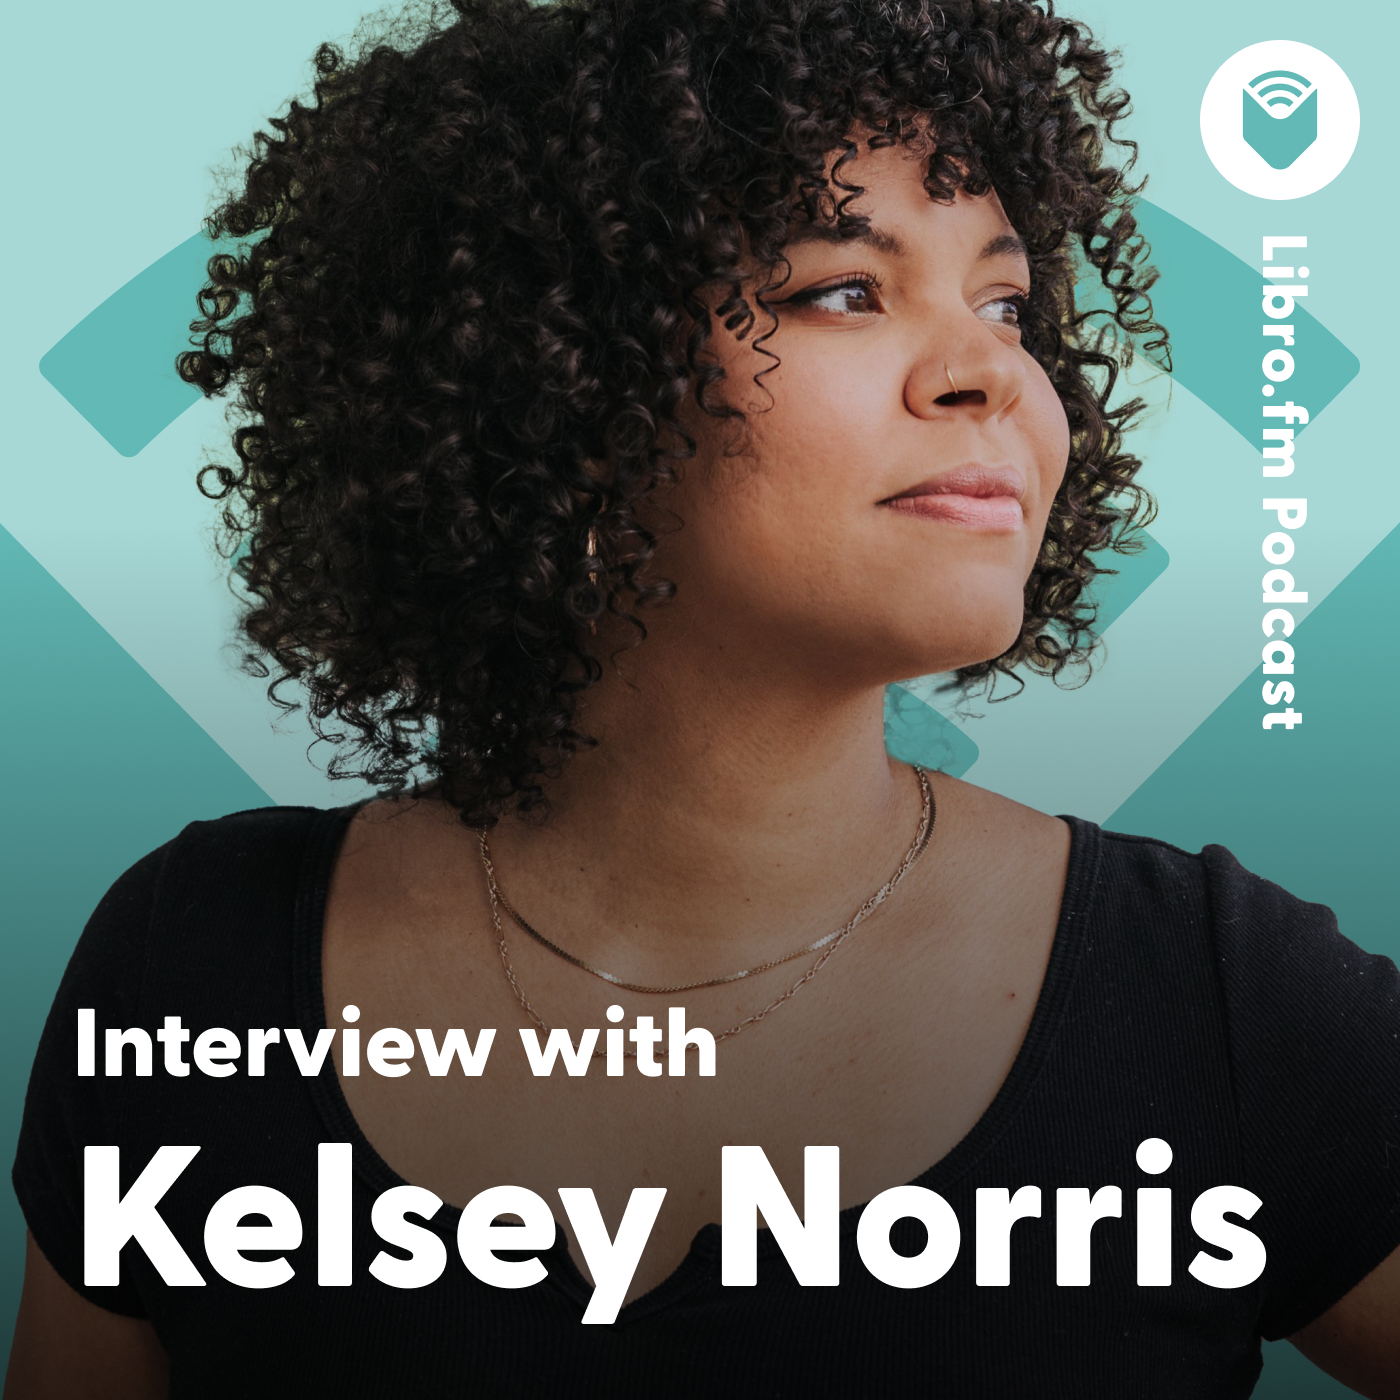 A headshot of Kelsey Norris on a teal background showing the Libro.fm logo. Text reads: “Libro.fm Podcast: Interview with Kelsey Norris.